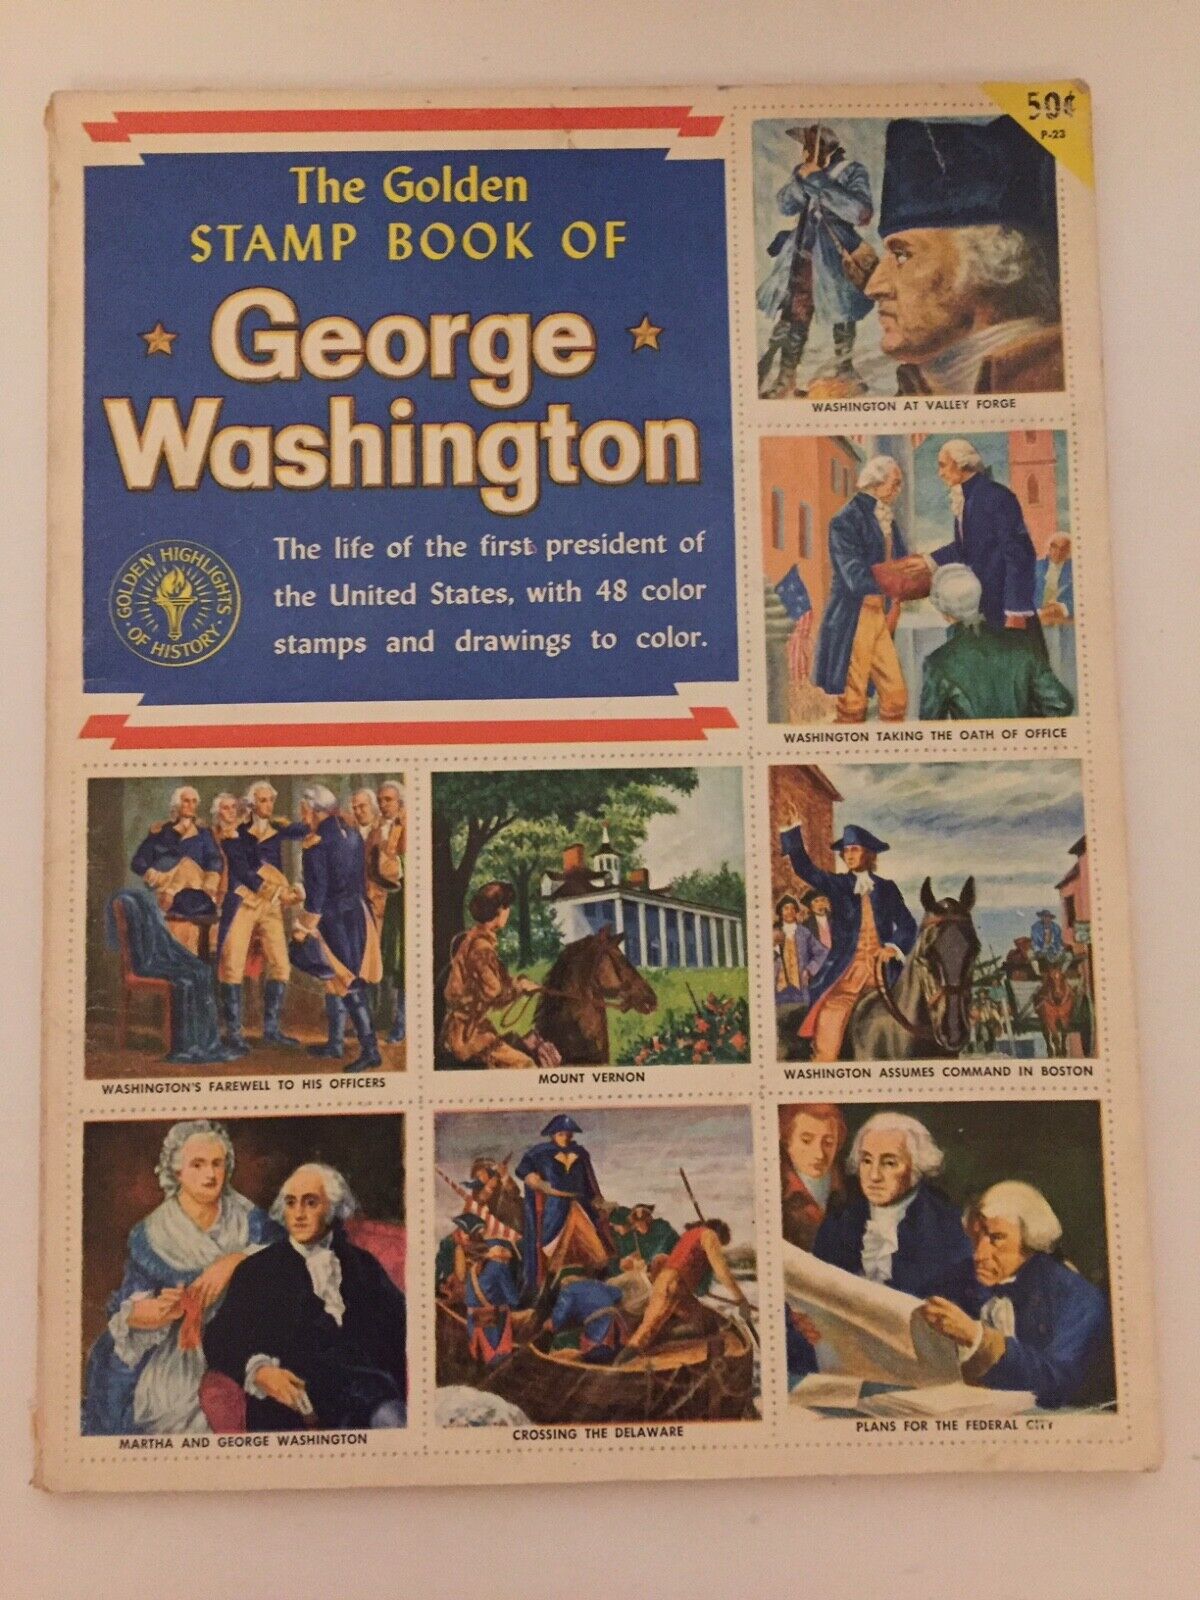 Vintage 1954 The Golden Stamp Book Of George Washington - Softcover